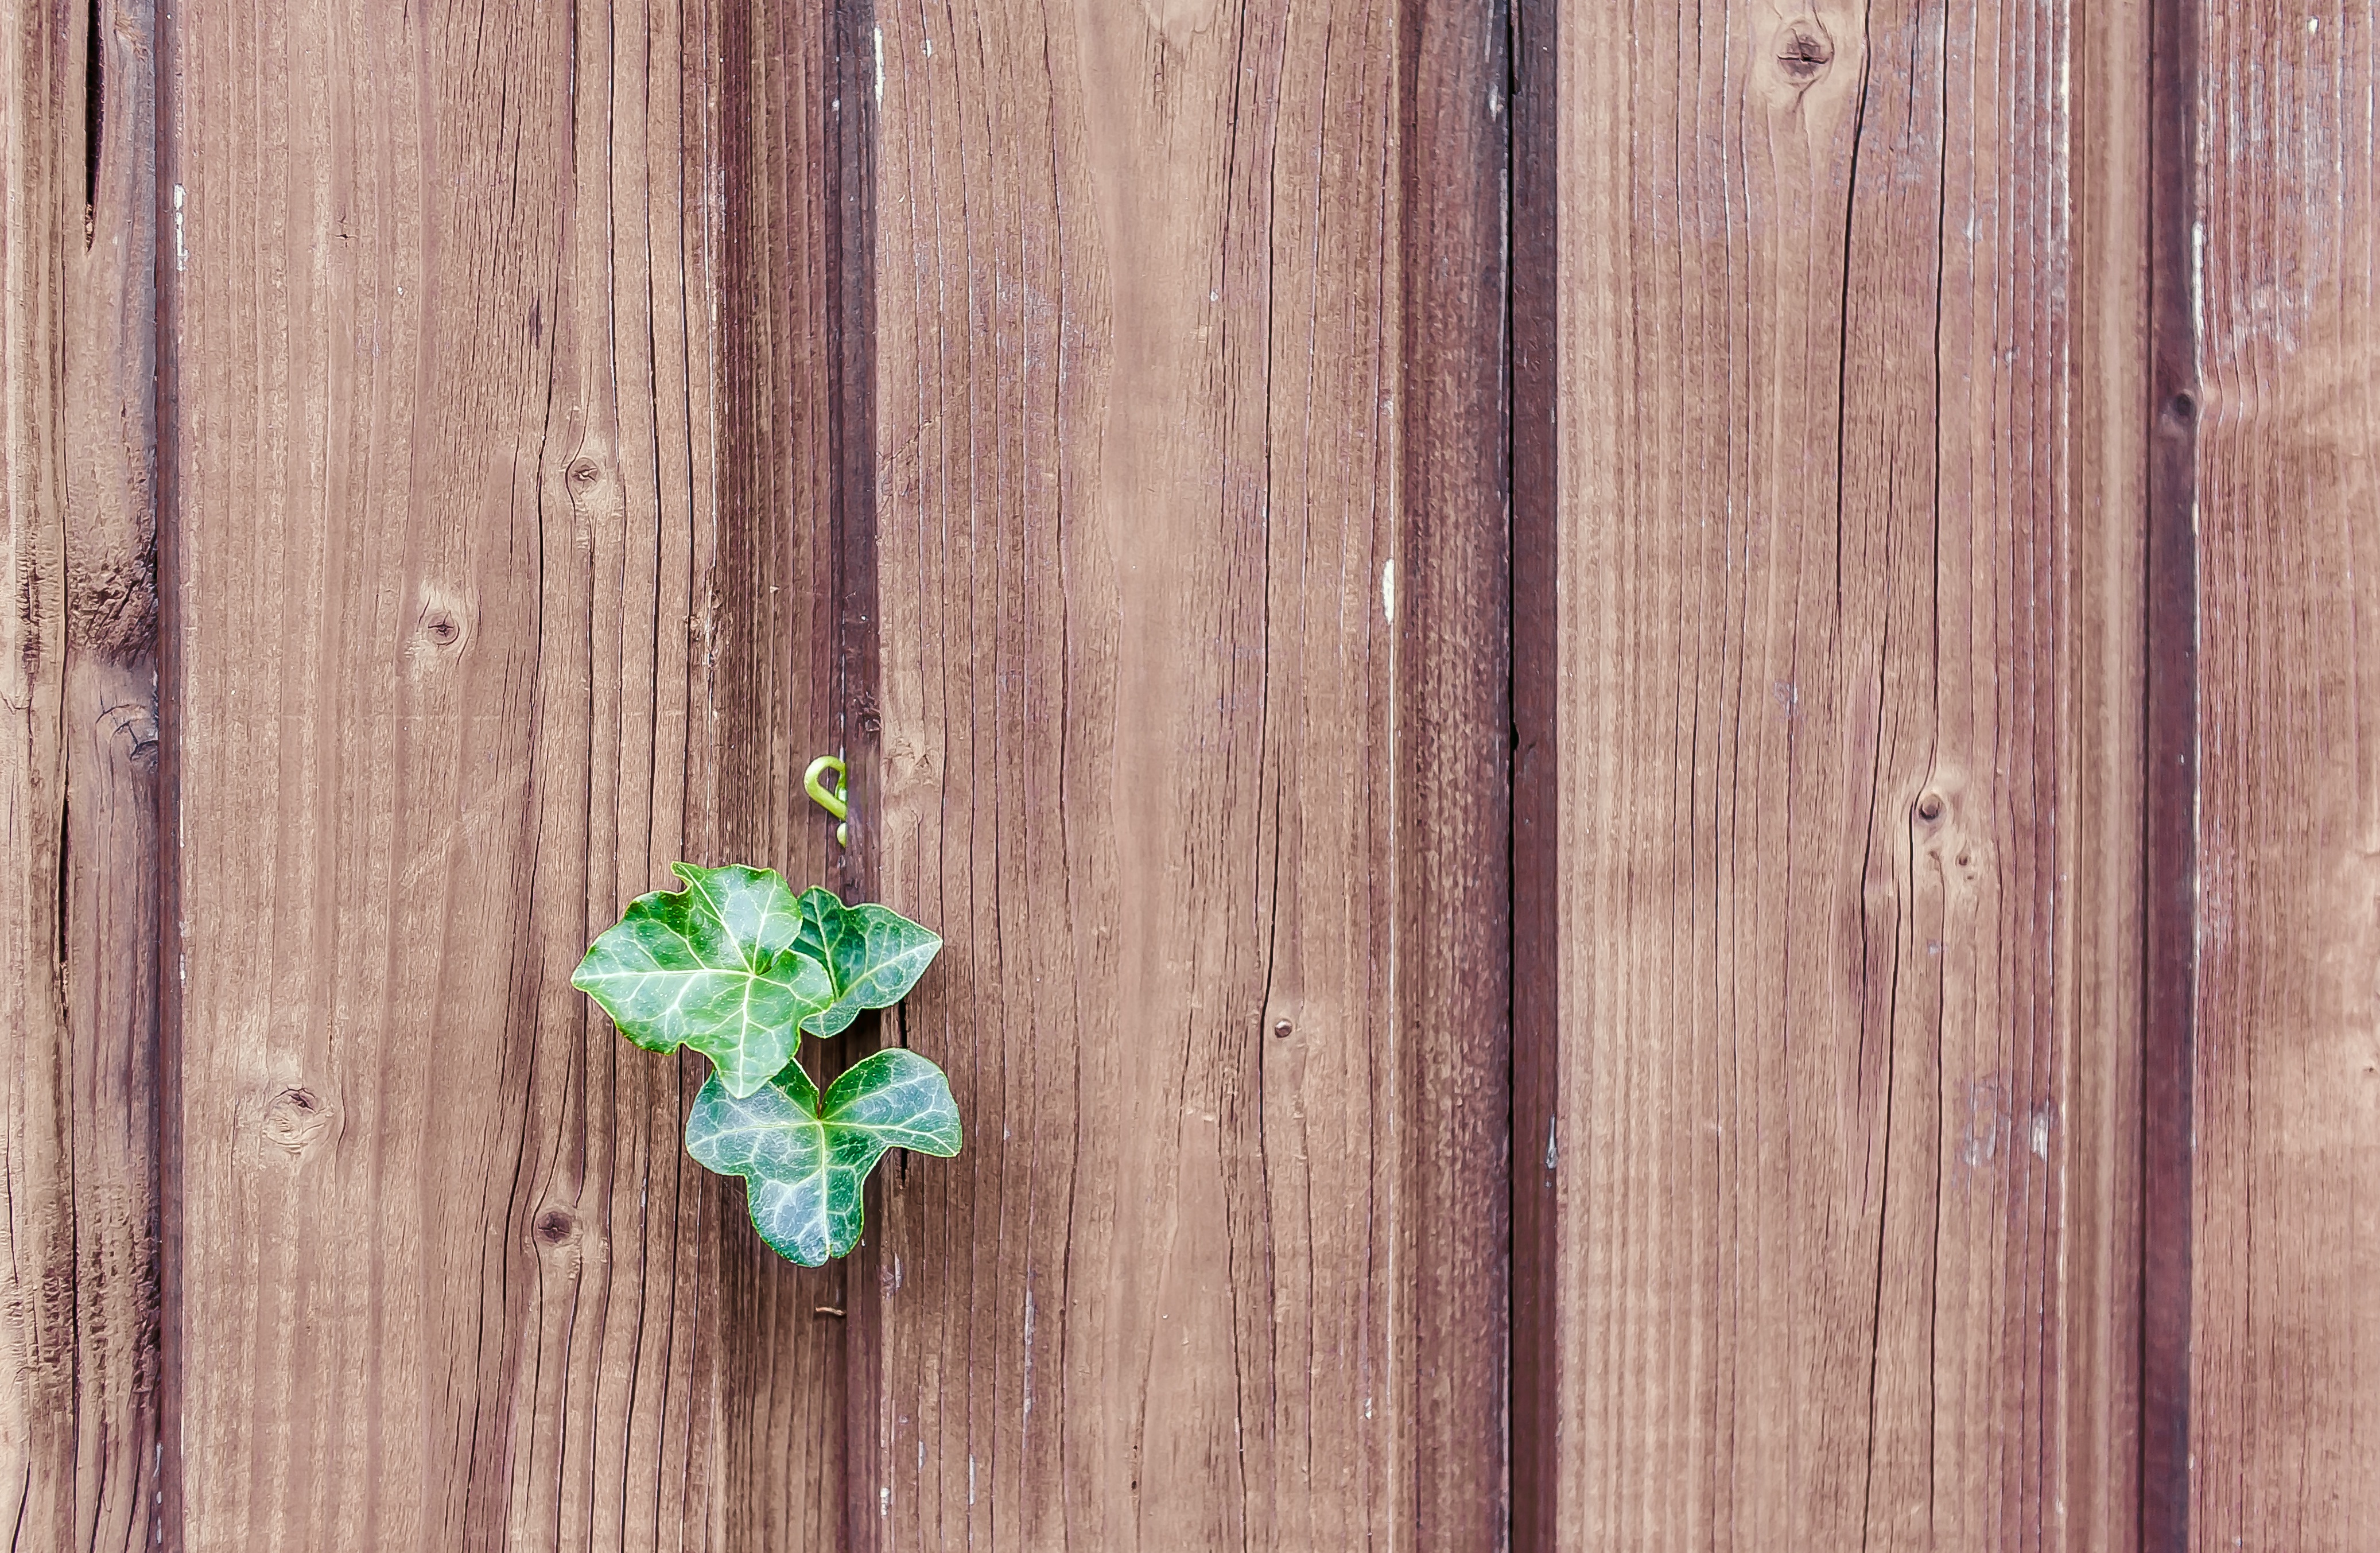 sheet, wall, plant, miscellanea, miscellaneous, leaf, fence, planks, board for Windows